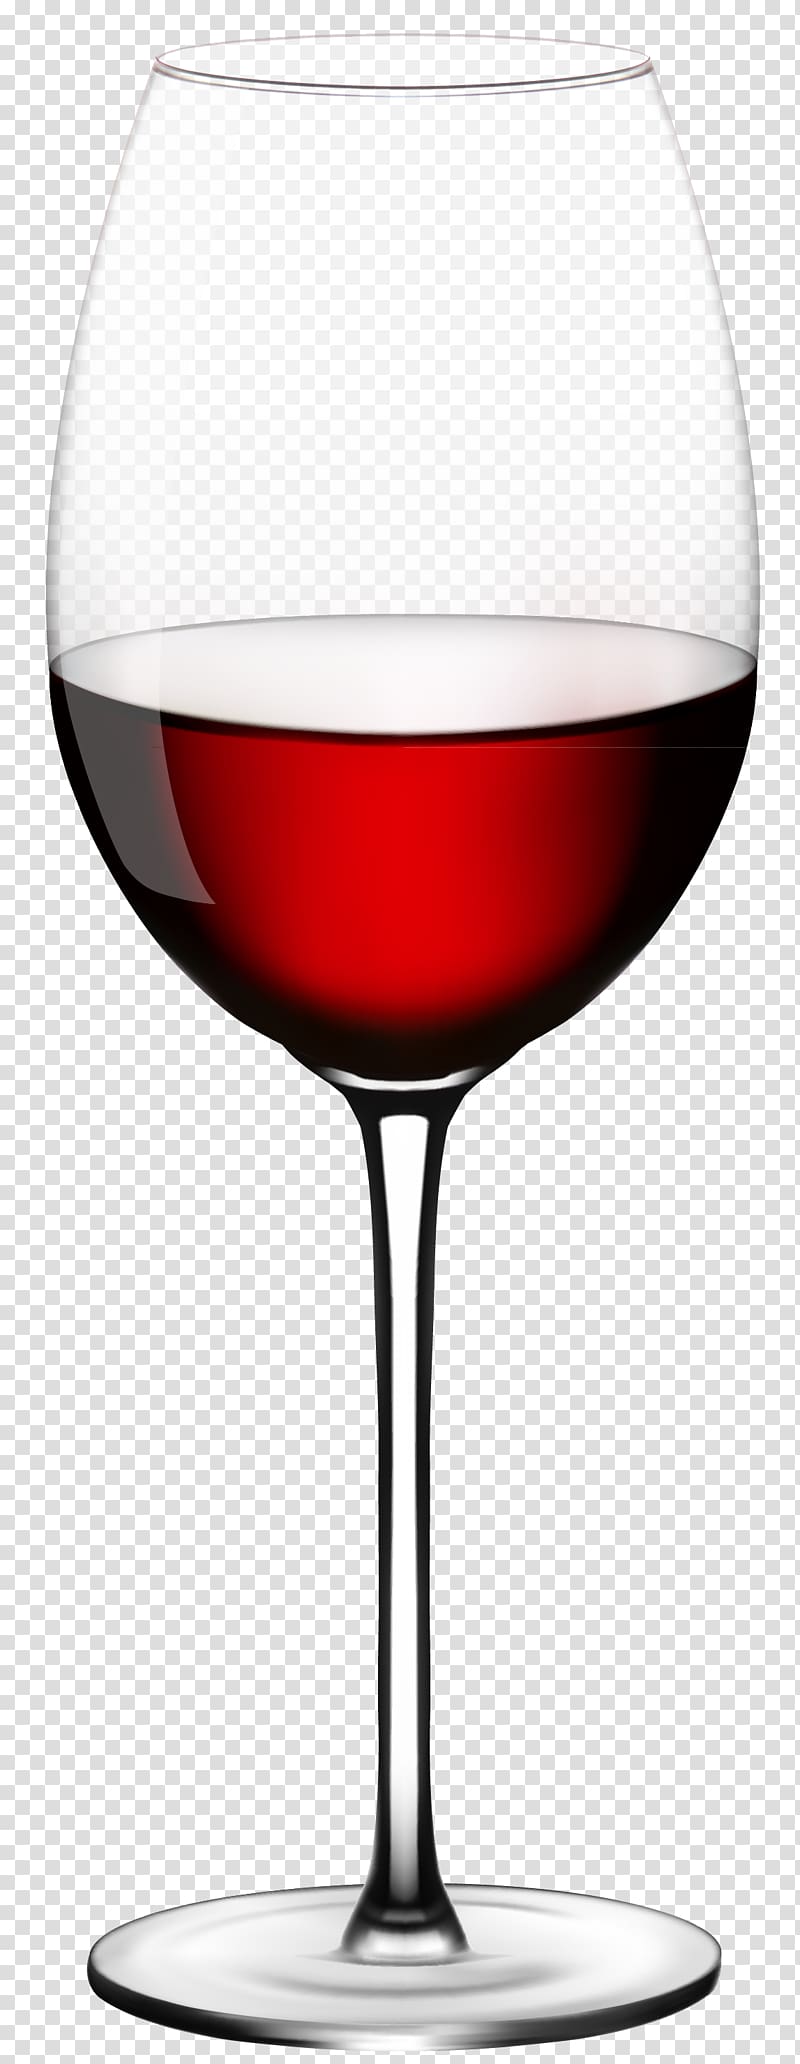 Red Wine Champagne Wine glass, Wine Glass , clear champagne glass transparent background PNG clipart